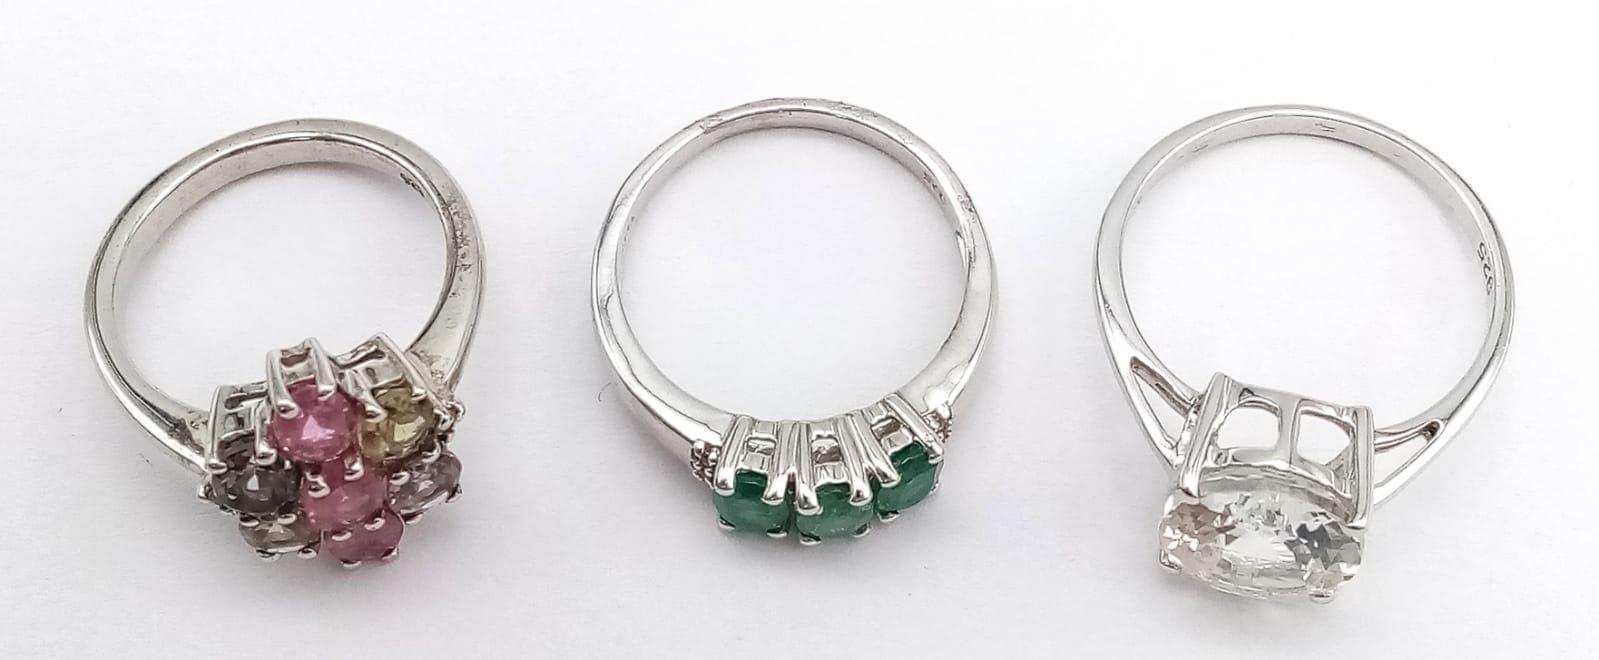 Three 925 Sterling Silver Gemstone Rings: Tourmaline - Size N, Topaz - Size S and Emerald - Size P. - Image 4 of 5